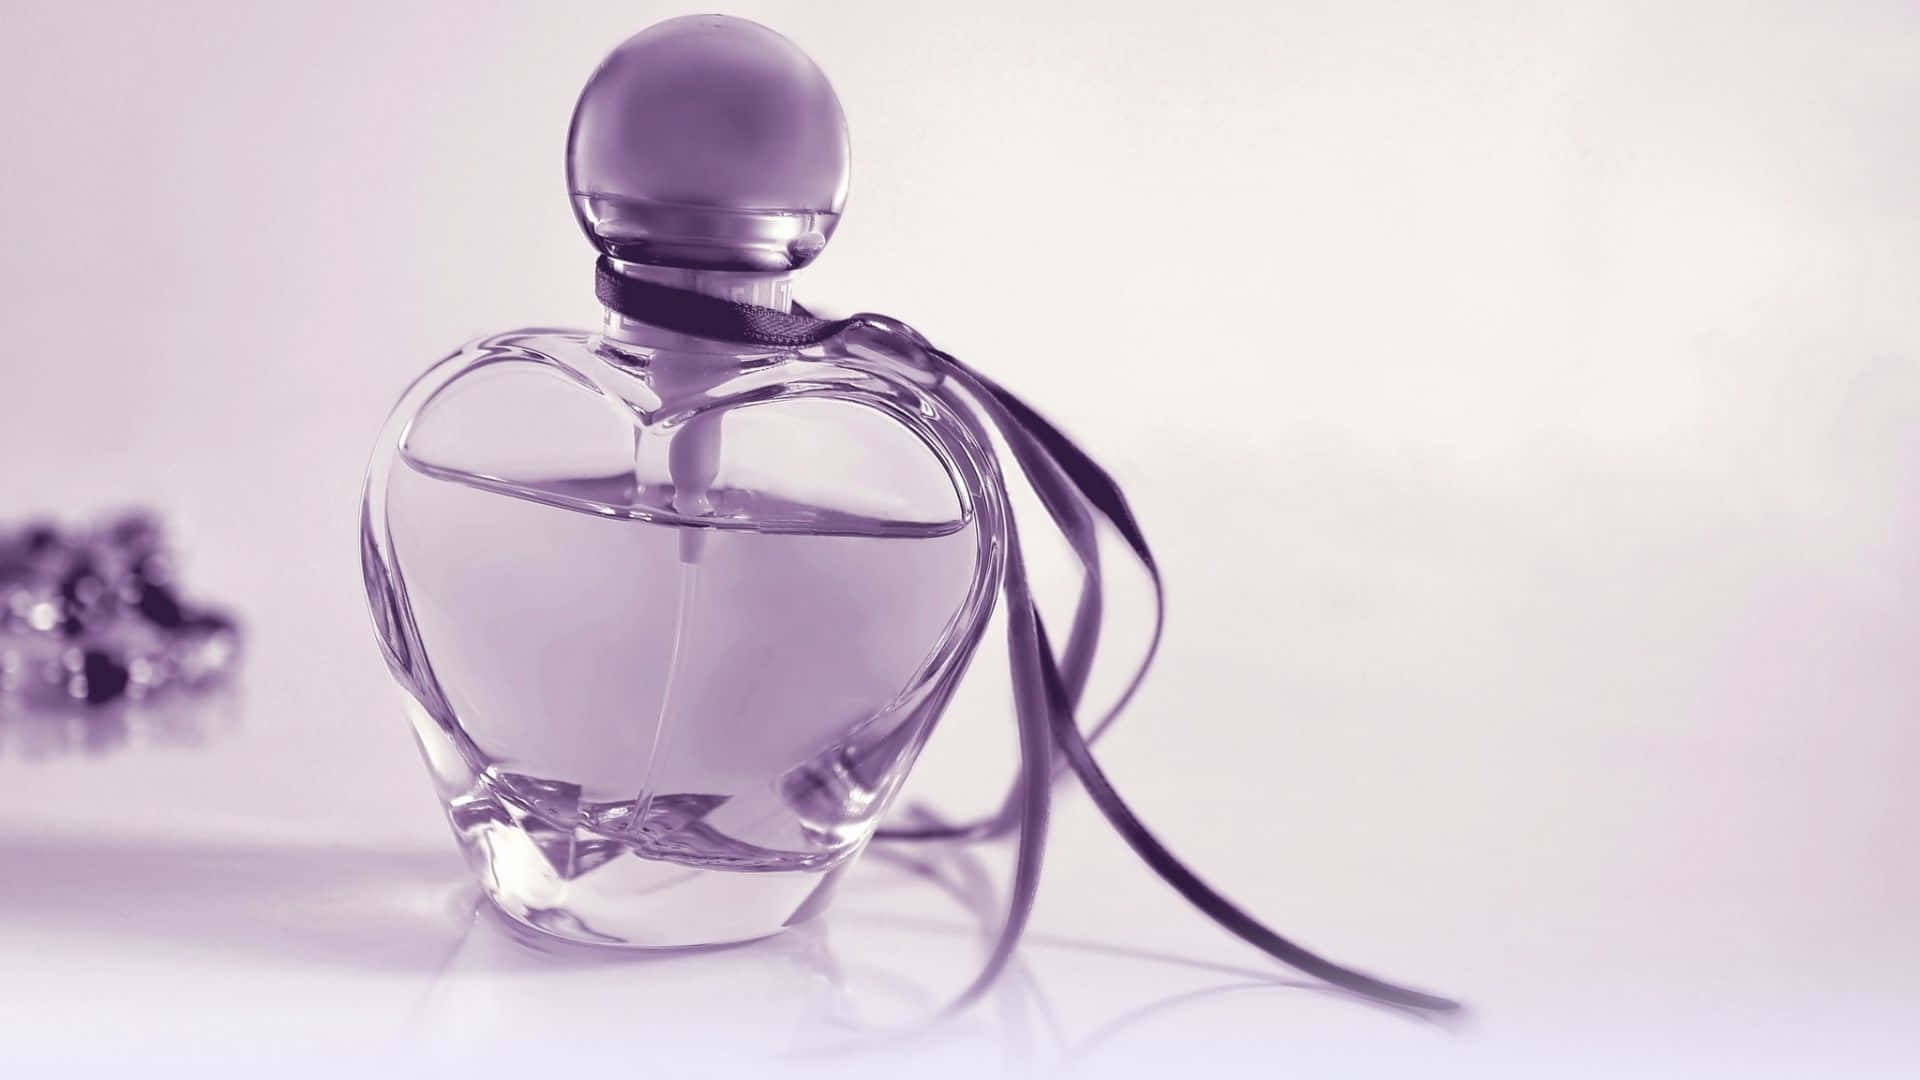 Enjoy the ambiance of a luxury fragrance Wallpaper